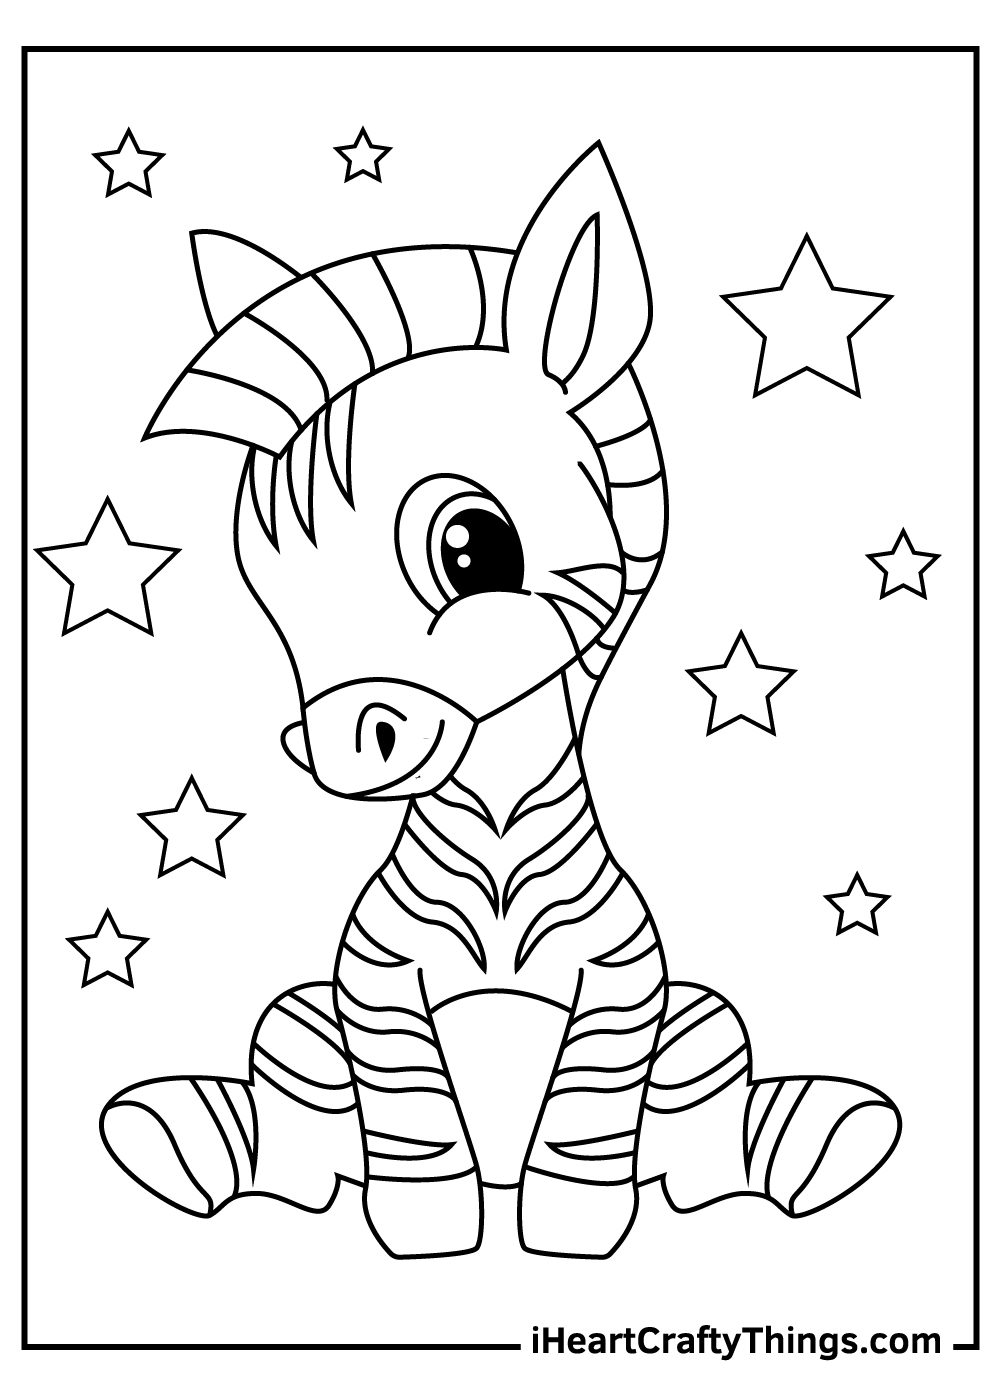 Printable Zebra Coloring Pages (Updated 2021)